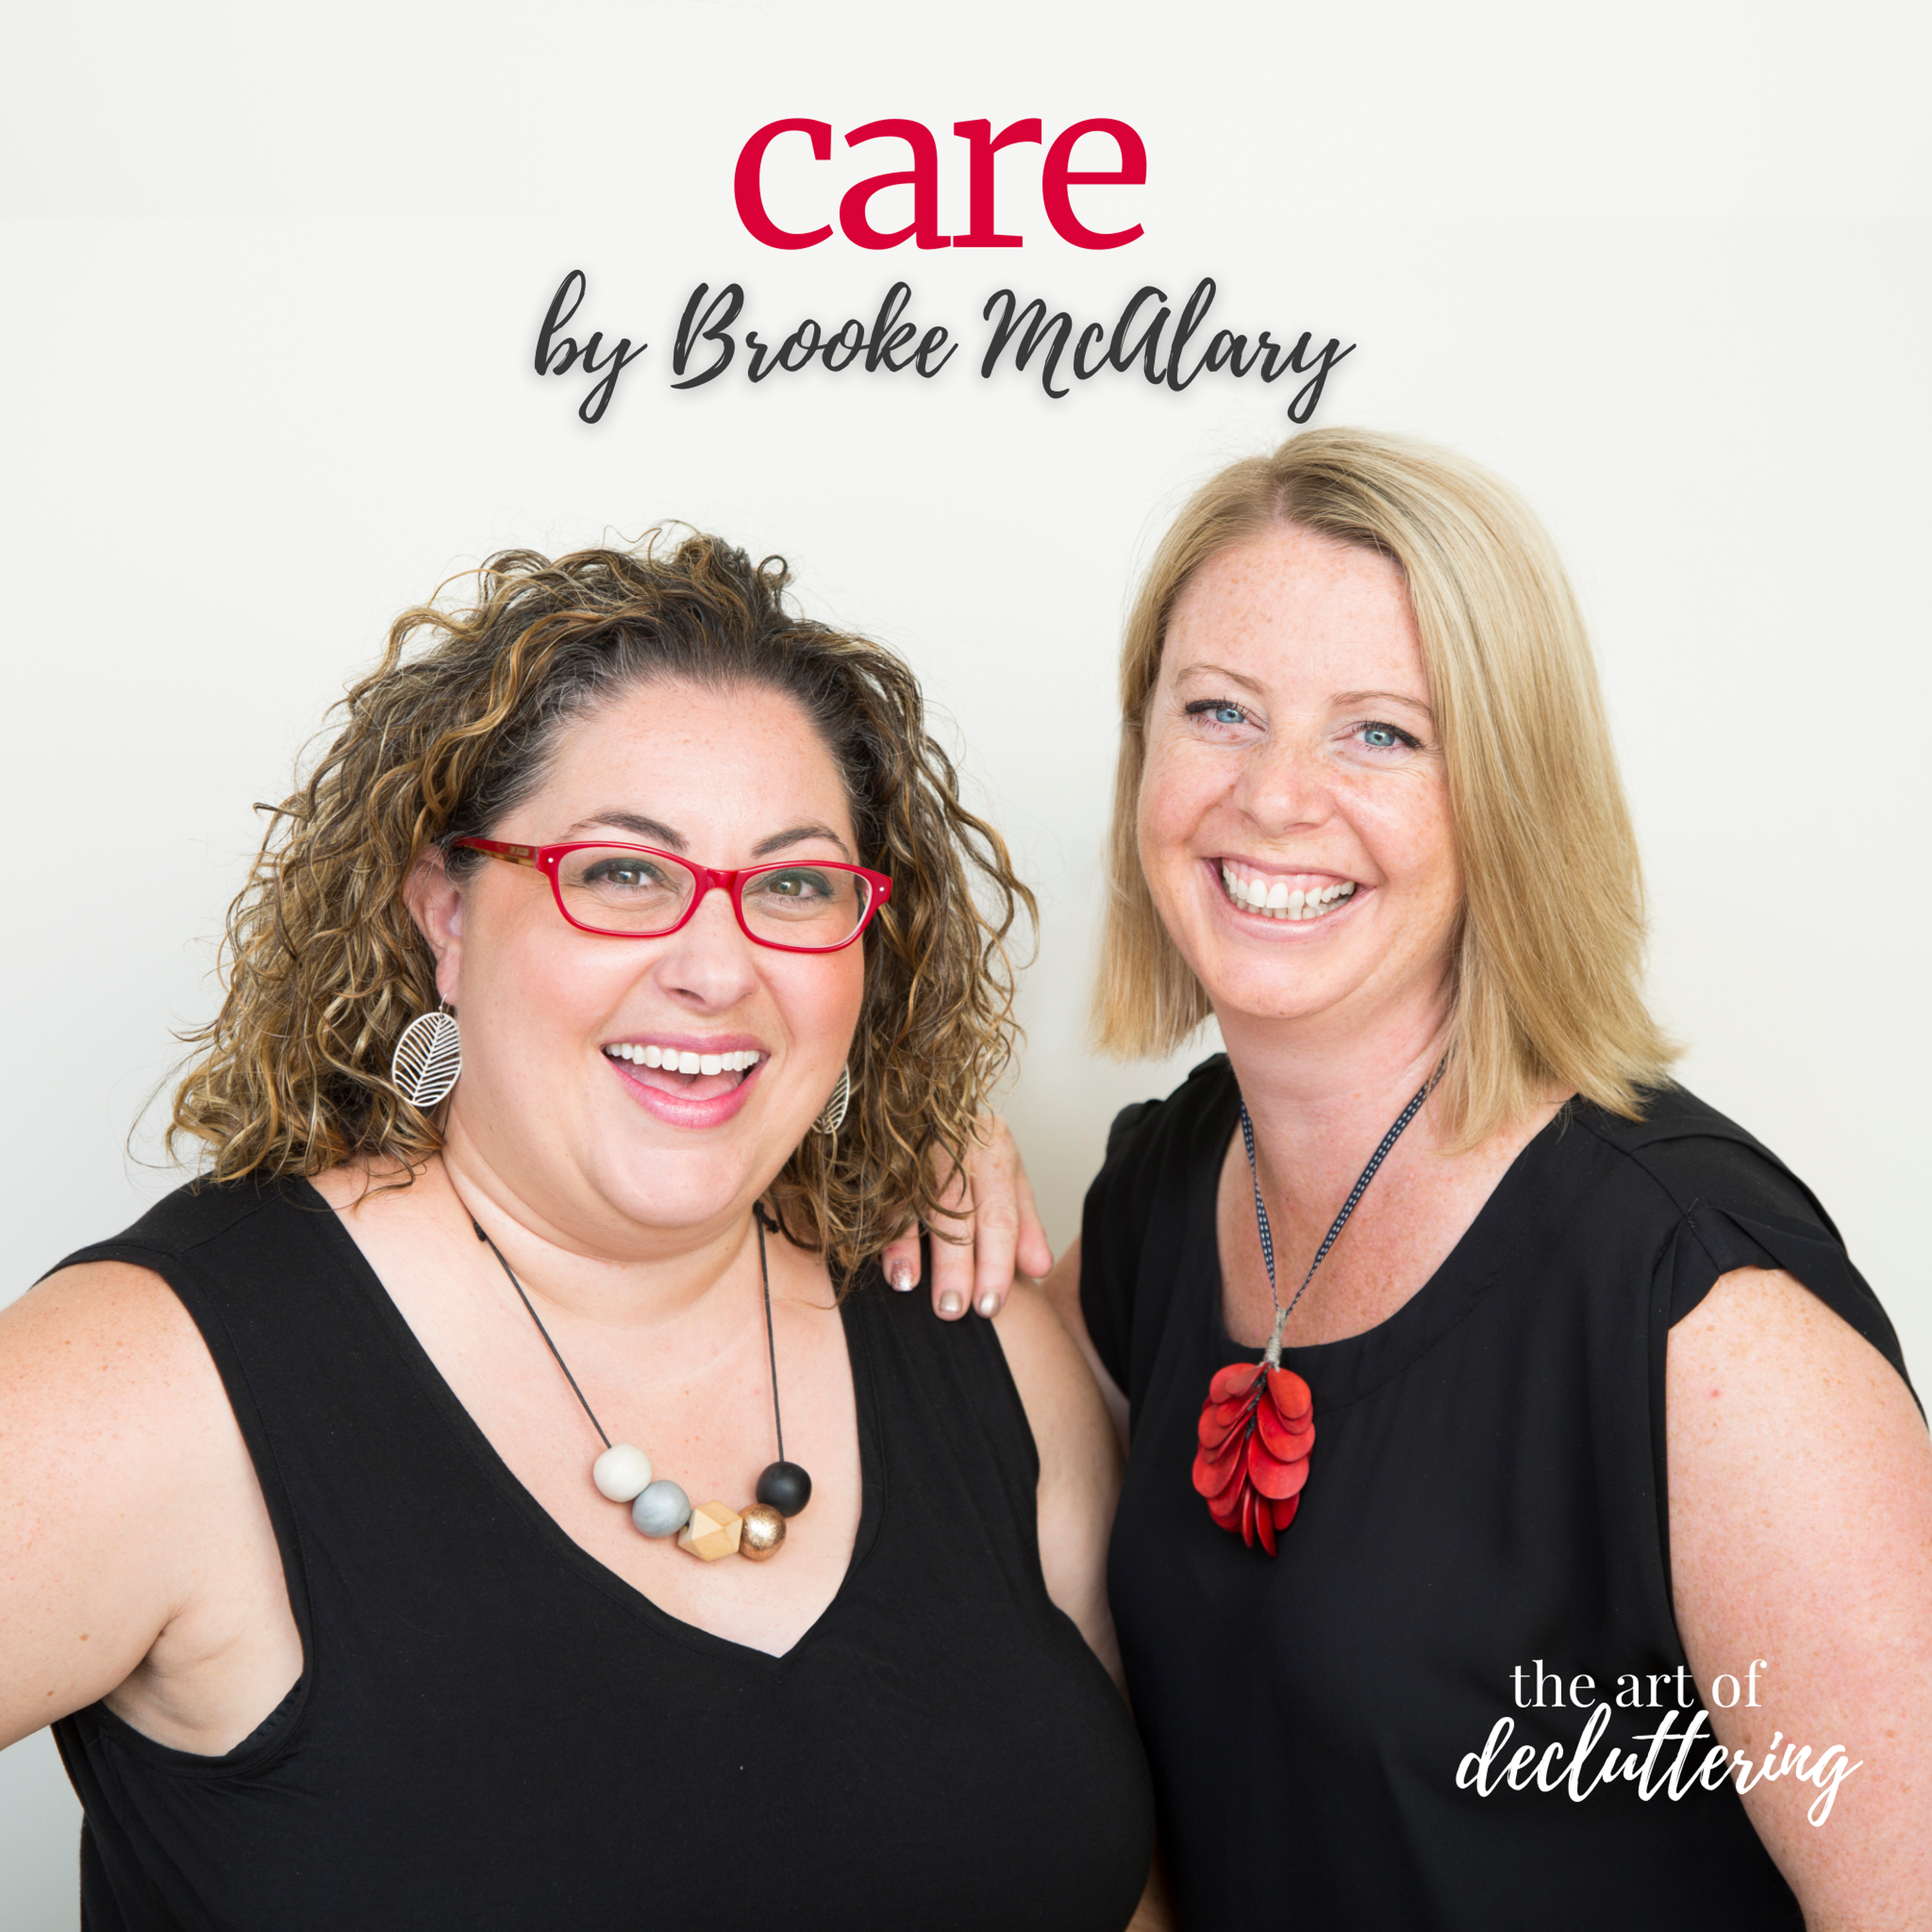 Care by Brooke McAlary